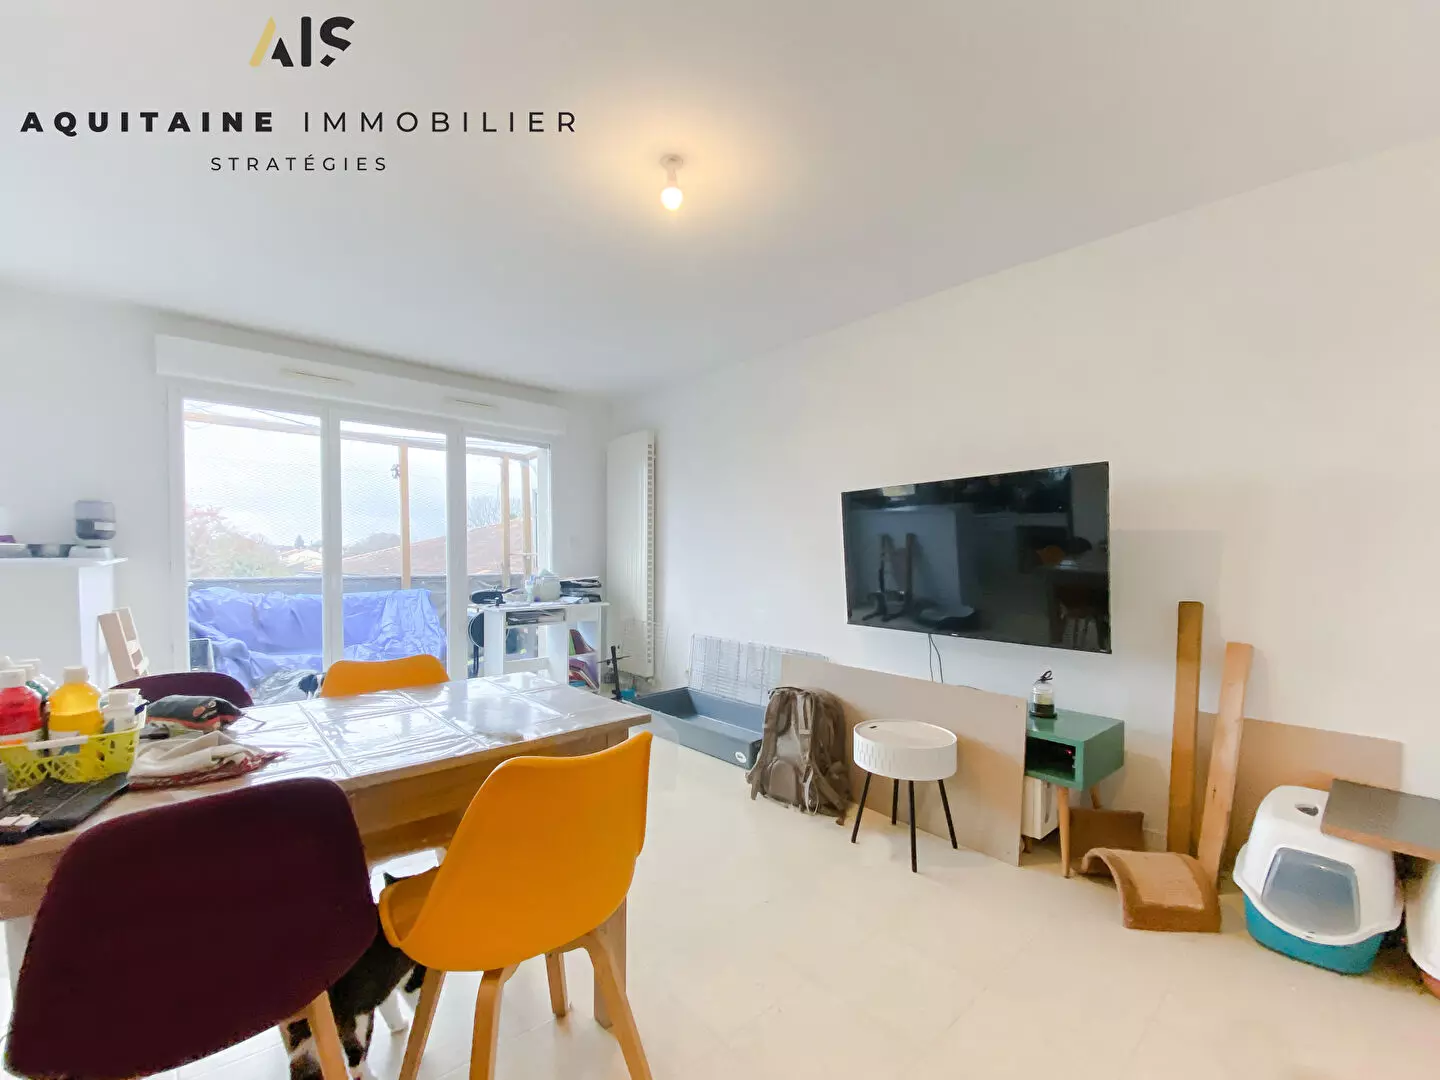 OFFRE ACCEPTEE - AQUITAINE IMMOBILIER STRATEGIES - POITIERS - APPARTEMENT TYPE 2 - 45.75 M² / image 1